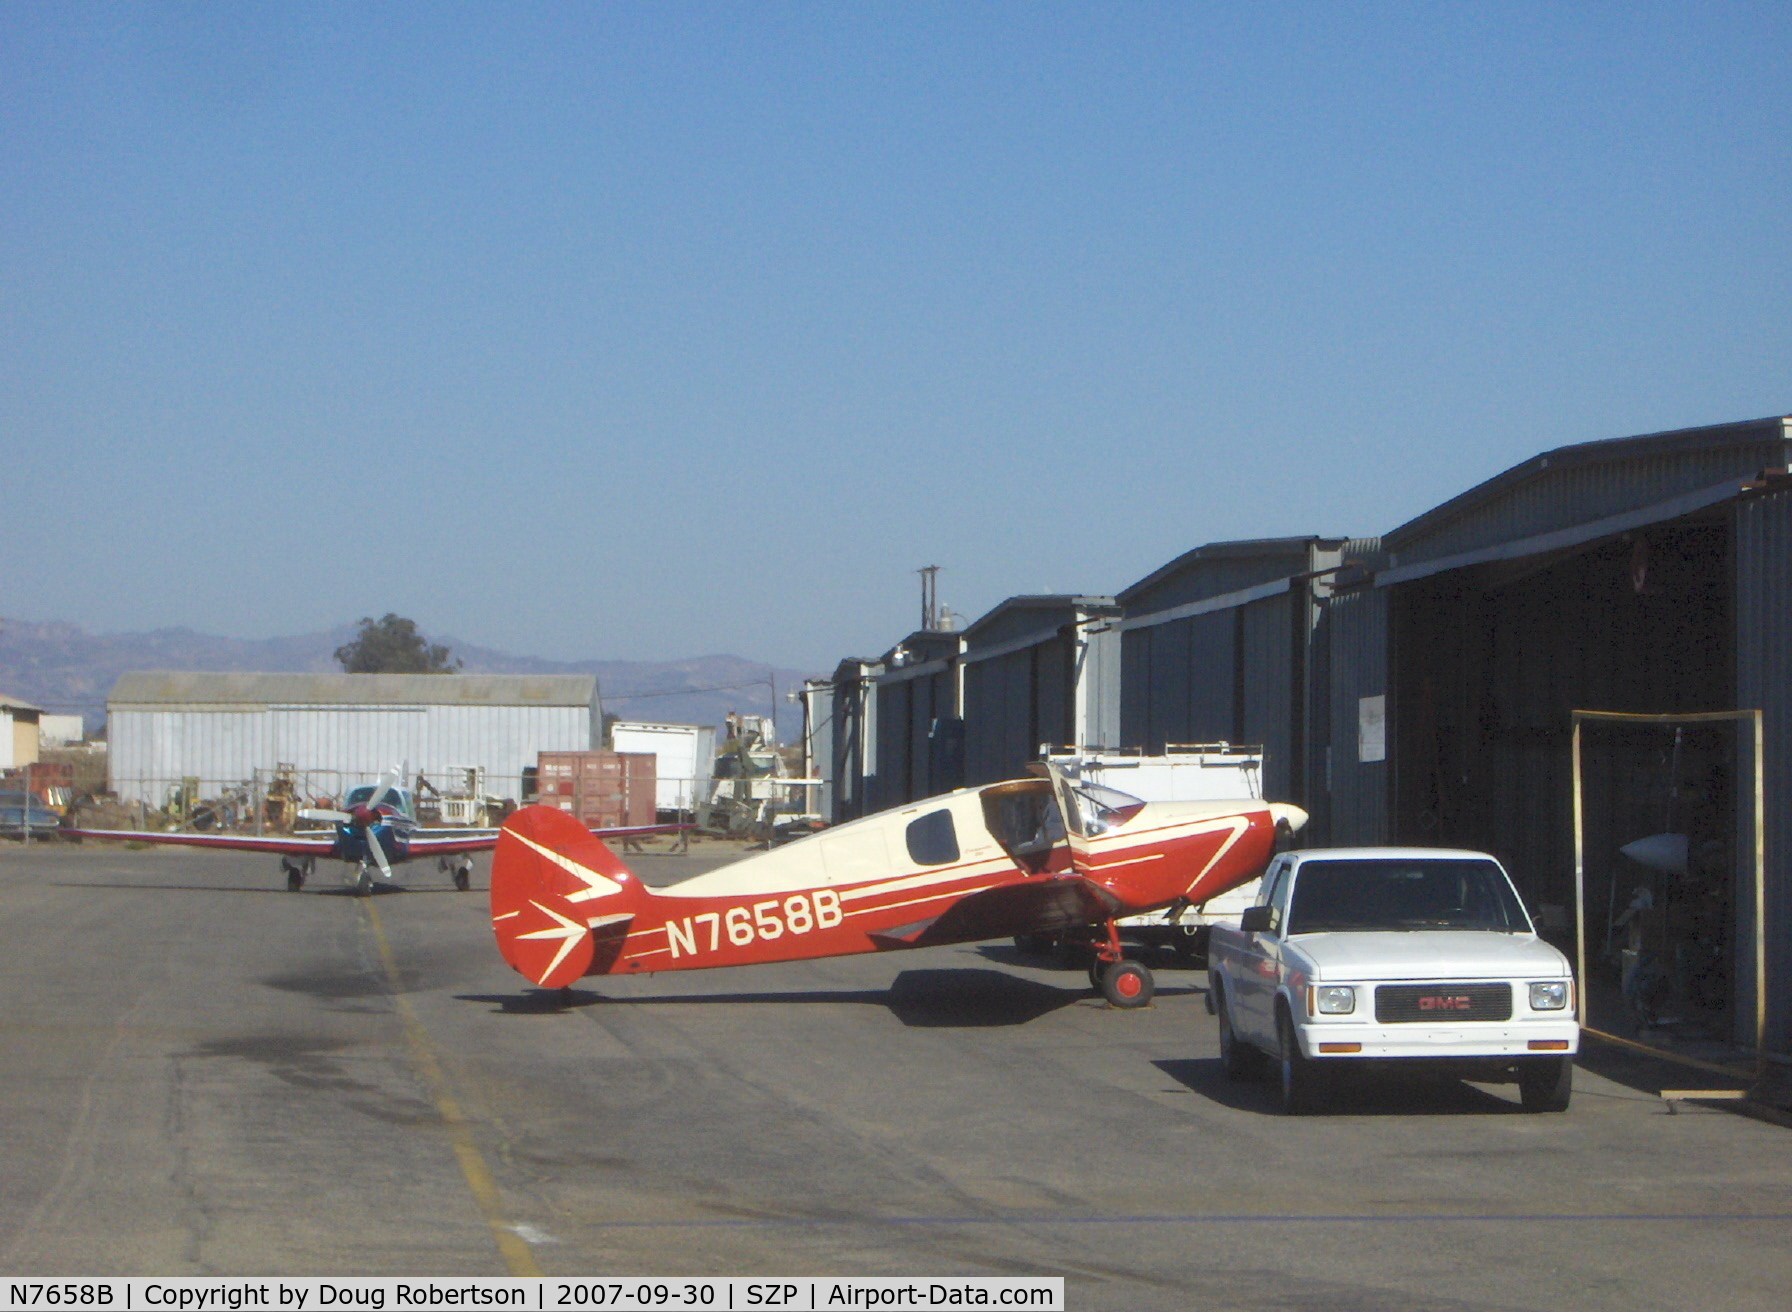 N7658B, 1957 Downer 14-19-2 C/N 4009, 1957 Northern Aircraft Bellanca 14-19-2 CRUISEMASTER, Continental O-470-K 230 Hp, triple tail, maintenance.  Note: Northern Aircraft did not change its name to Downer Aircraft until 1959